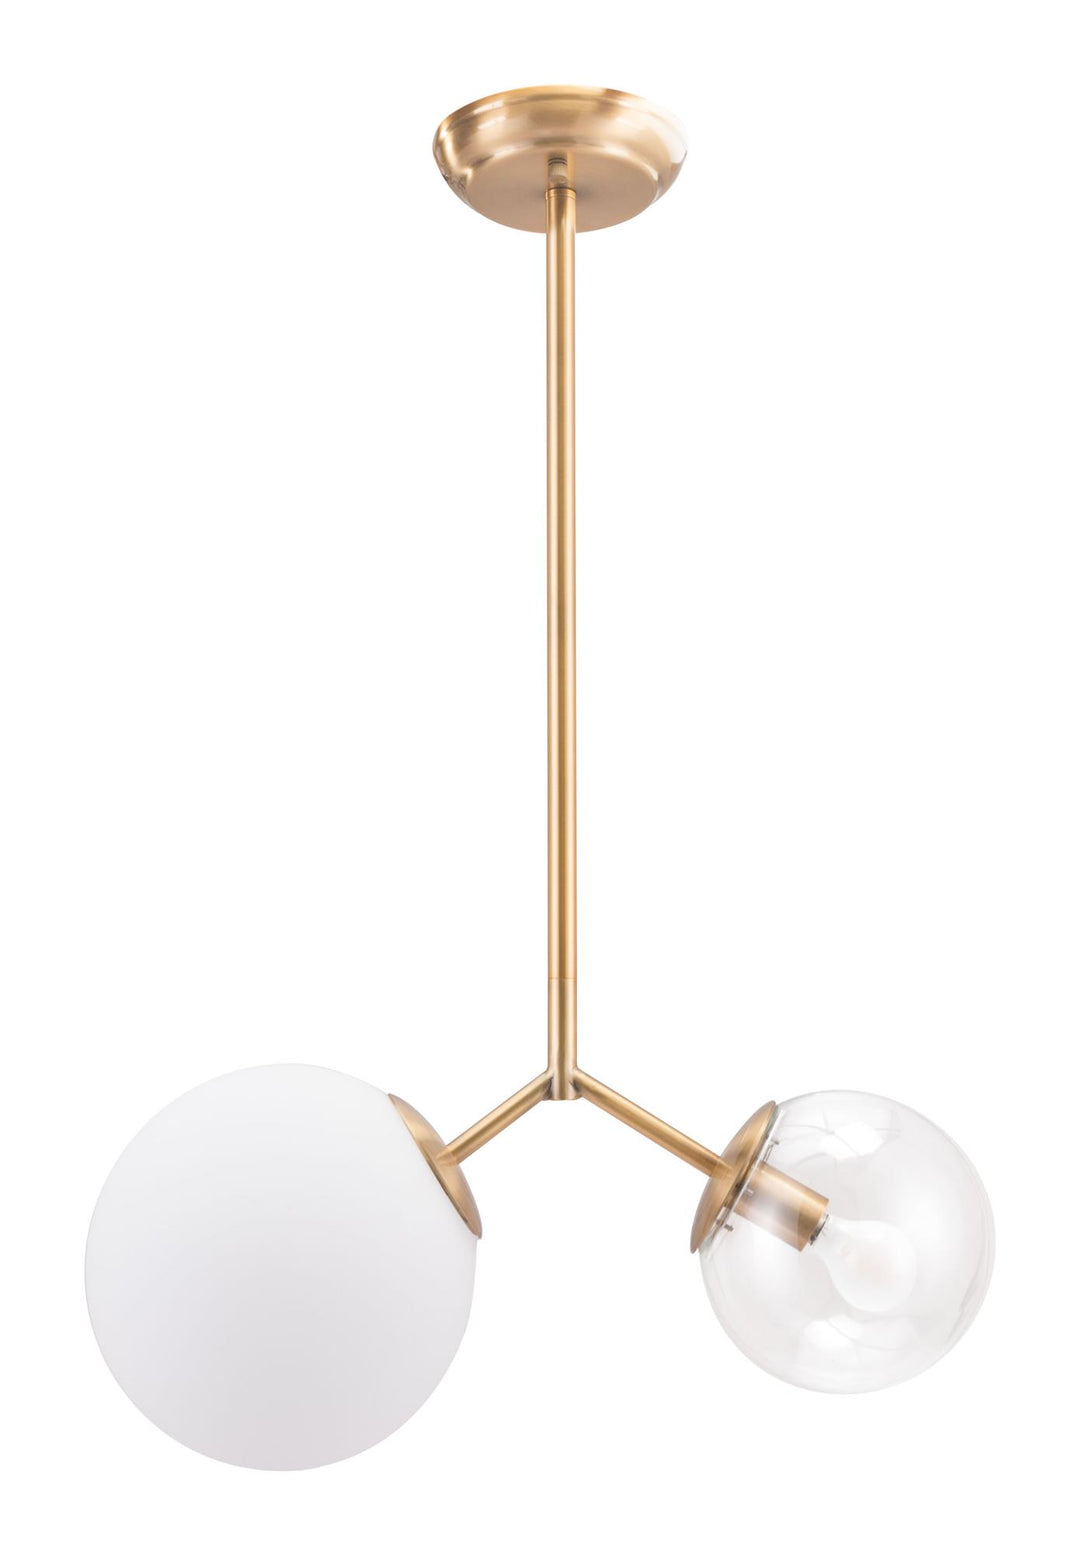 Constance's stylish ceiling lamp for flexible hanging -  N/A